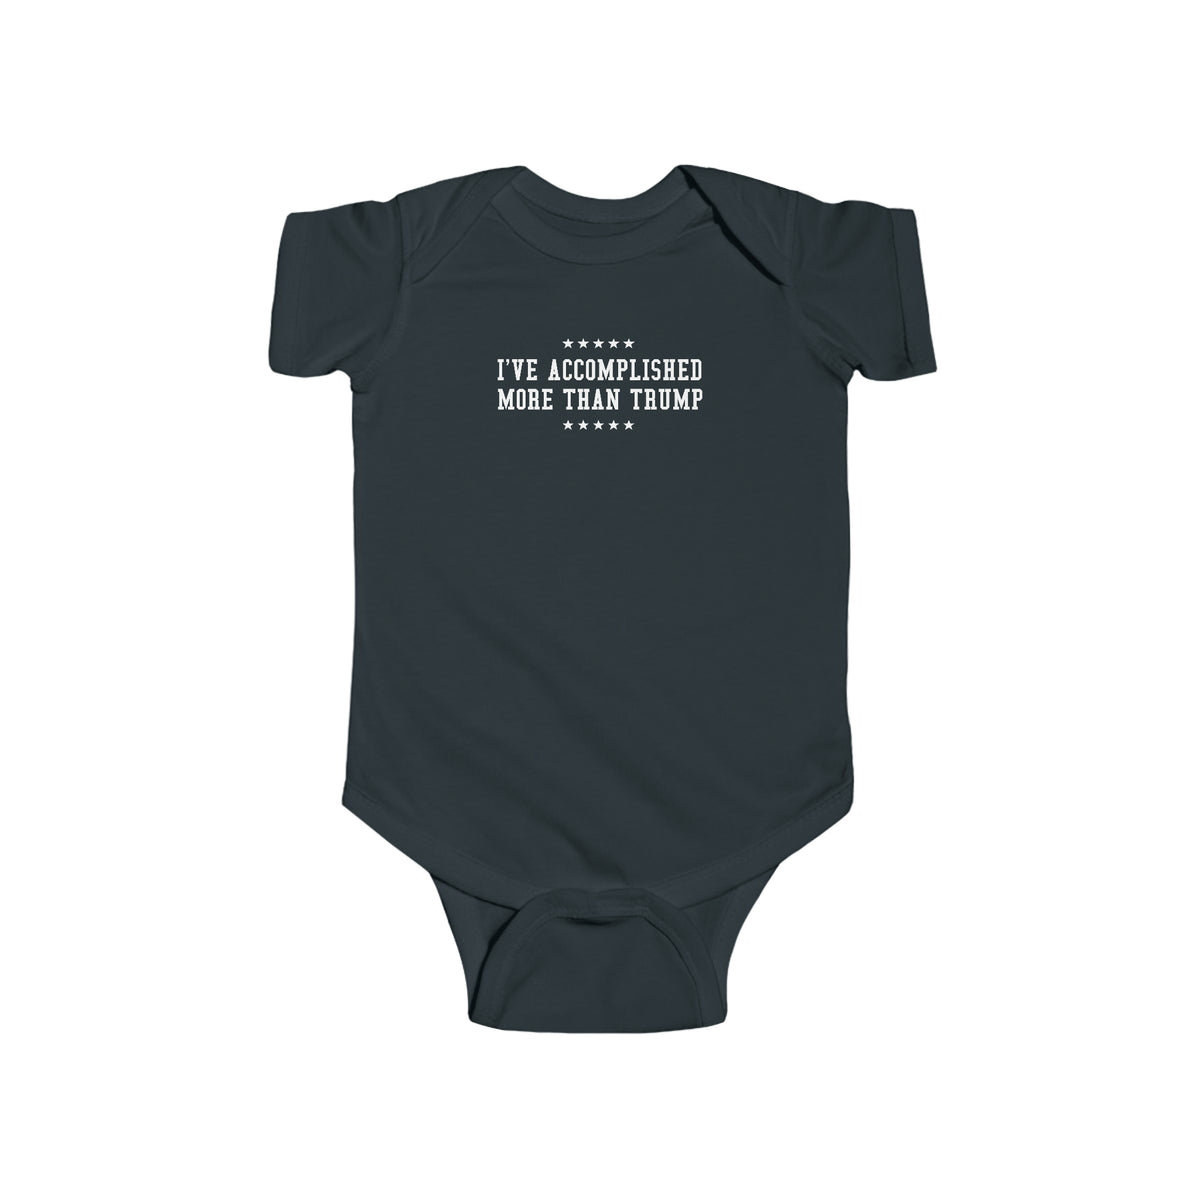 I've Accomplished More Than Trump - Baby Onesie